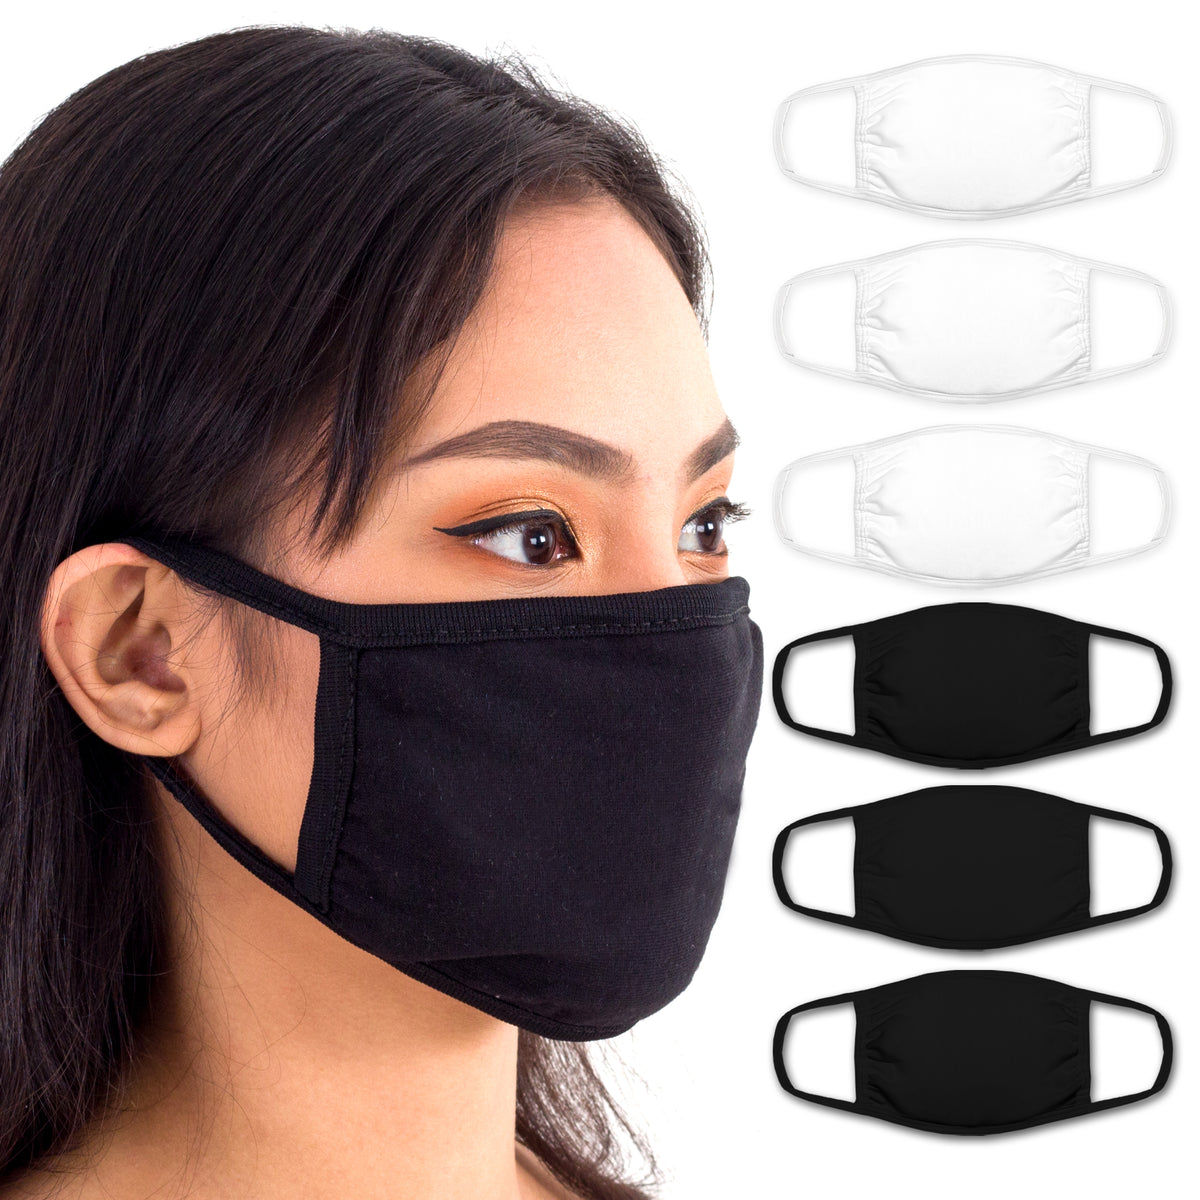 Face Mouth Mask - Cotton Face Covering Neck Mask for Men and Women - 6 Pack Solid White and Solid Black